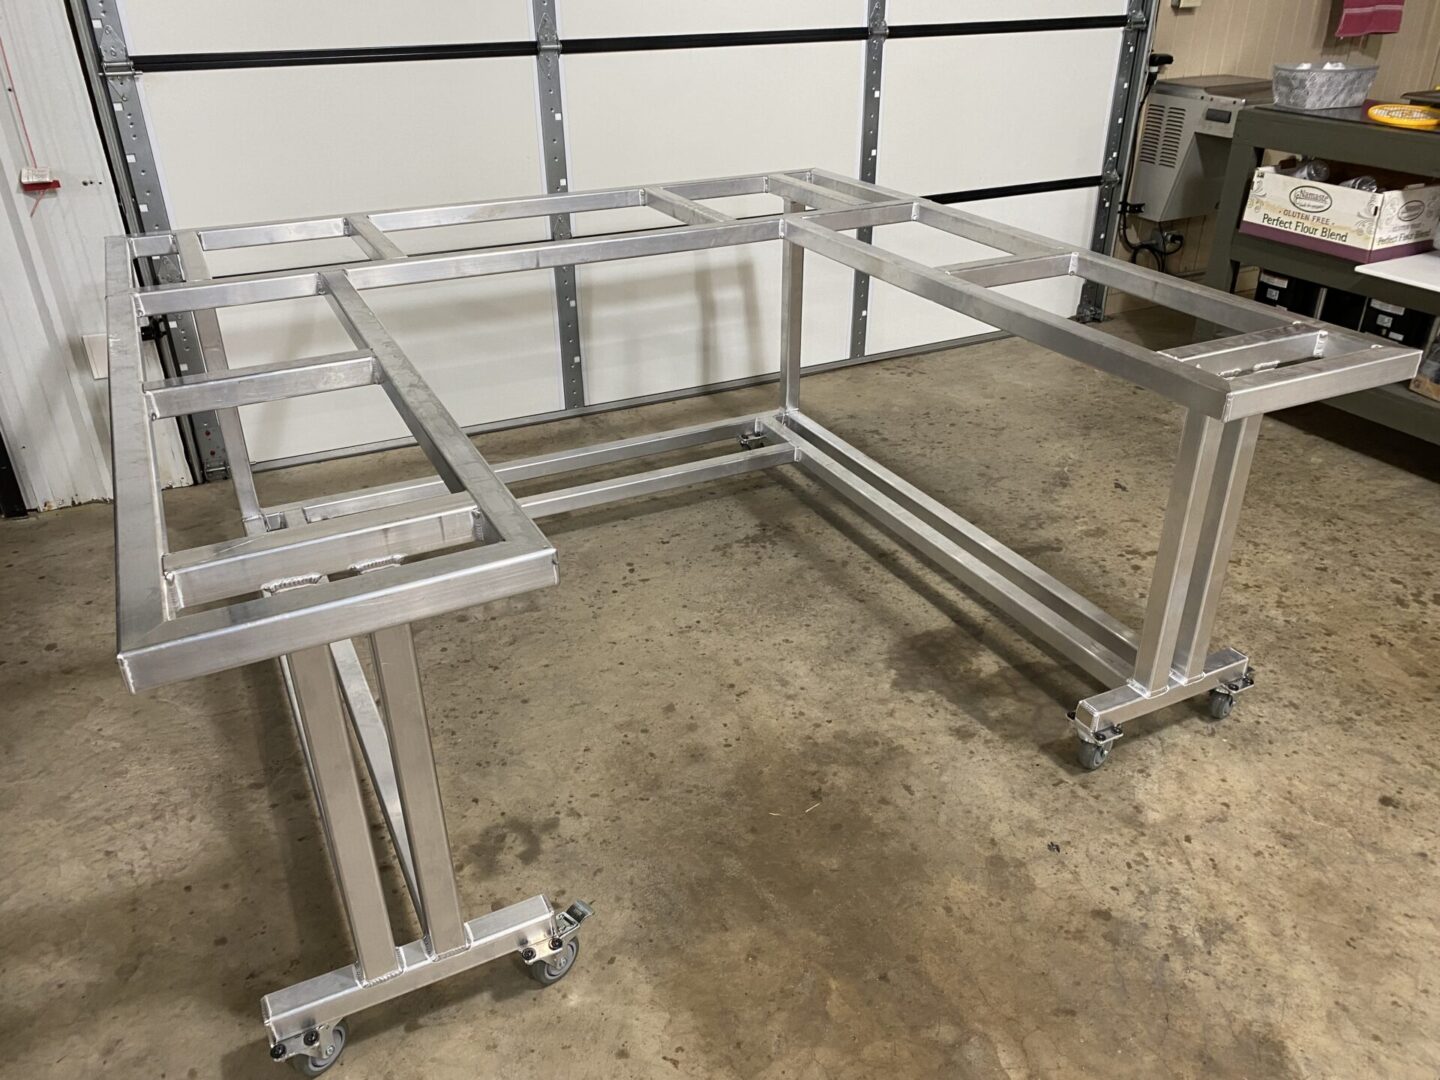 The frame being used for making a U Shaped table